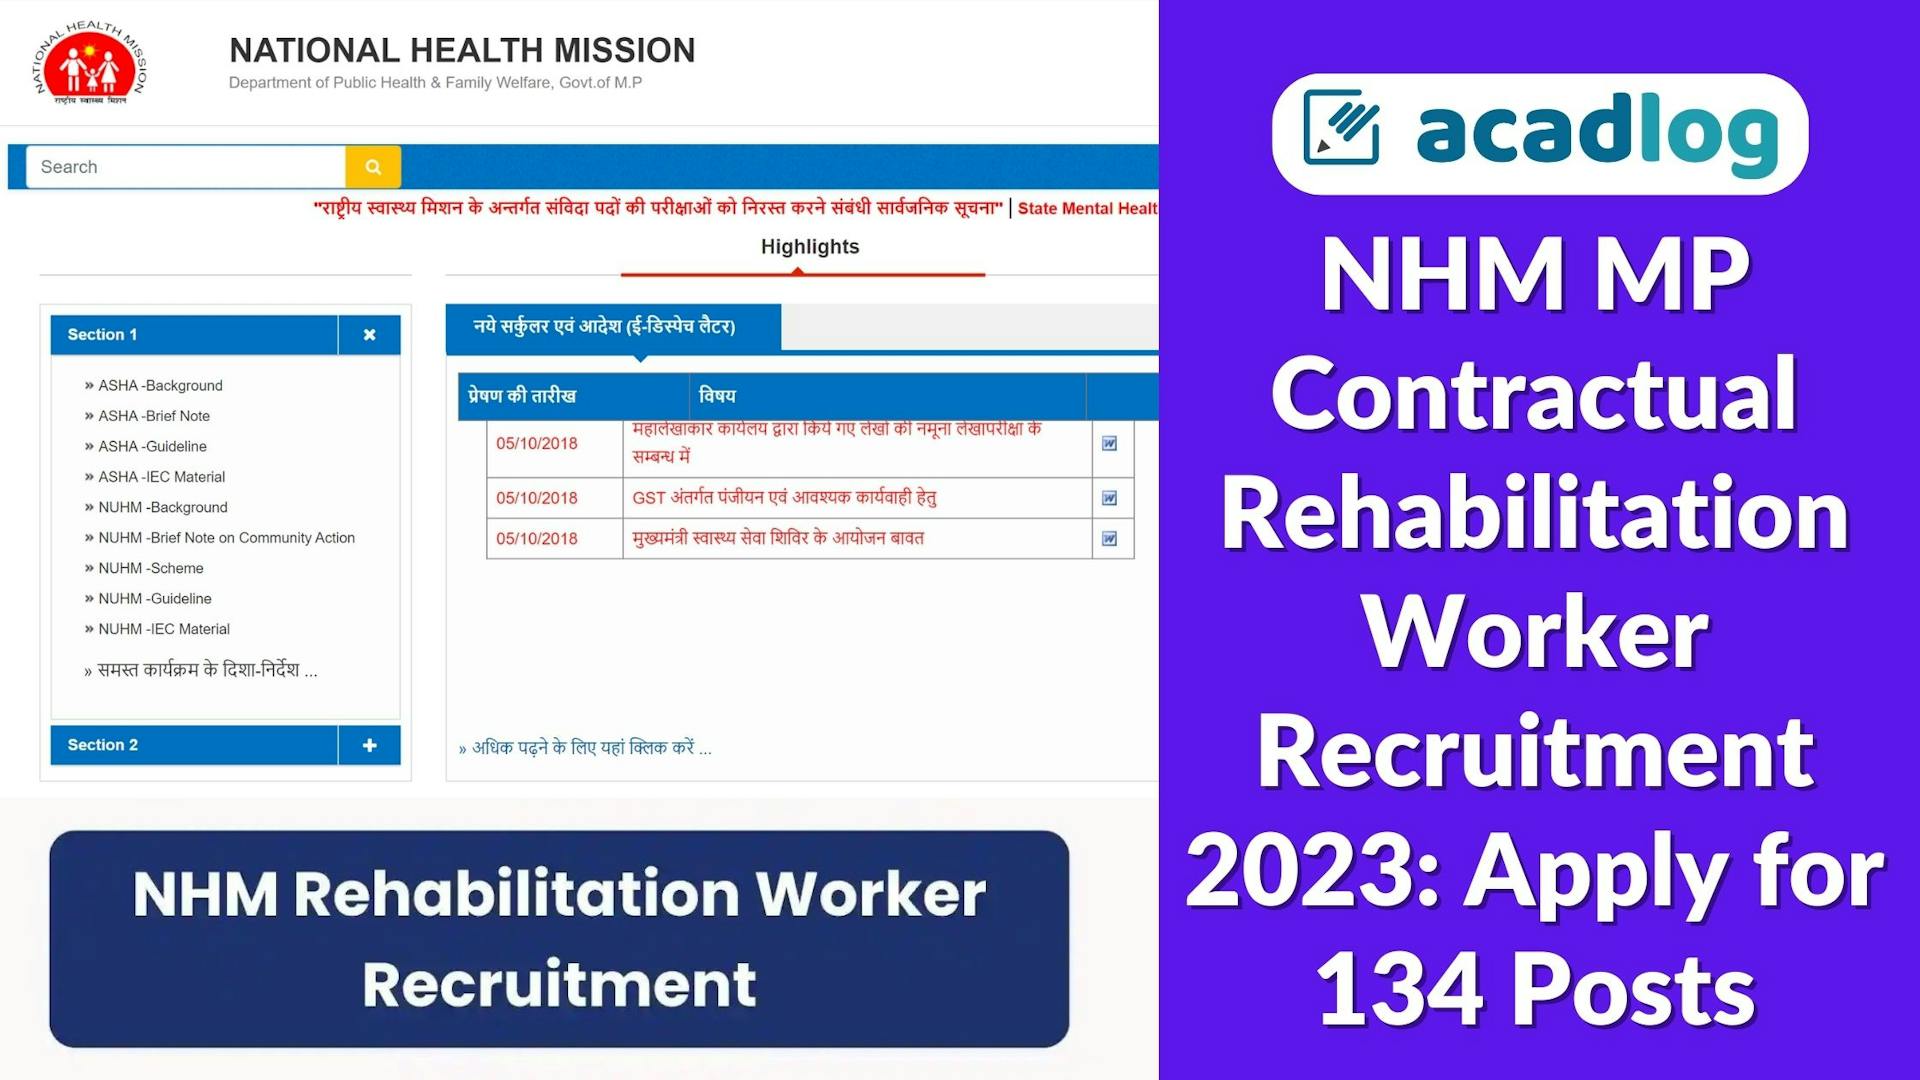 NHM MP Contractual Rehabilitation Worker Recruitment 2023: Apply for 134 Posts